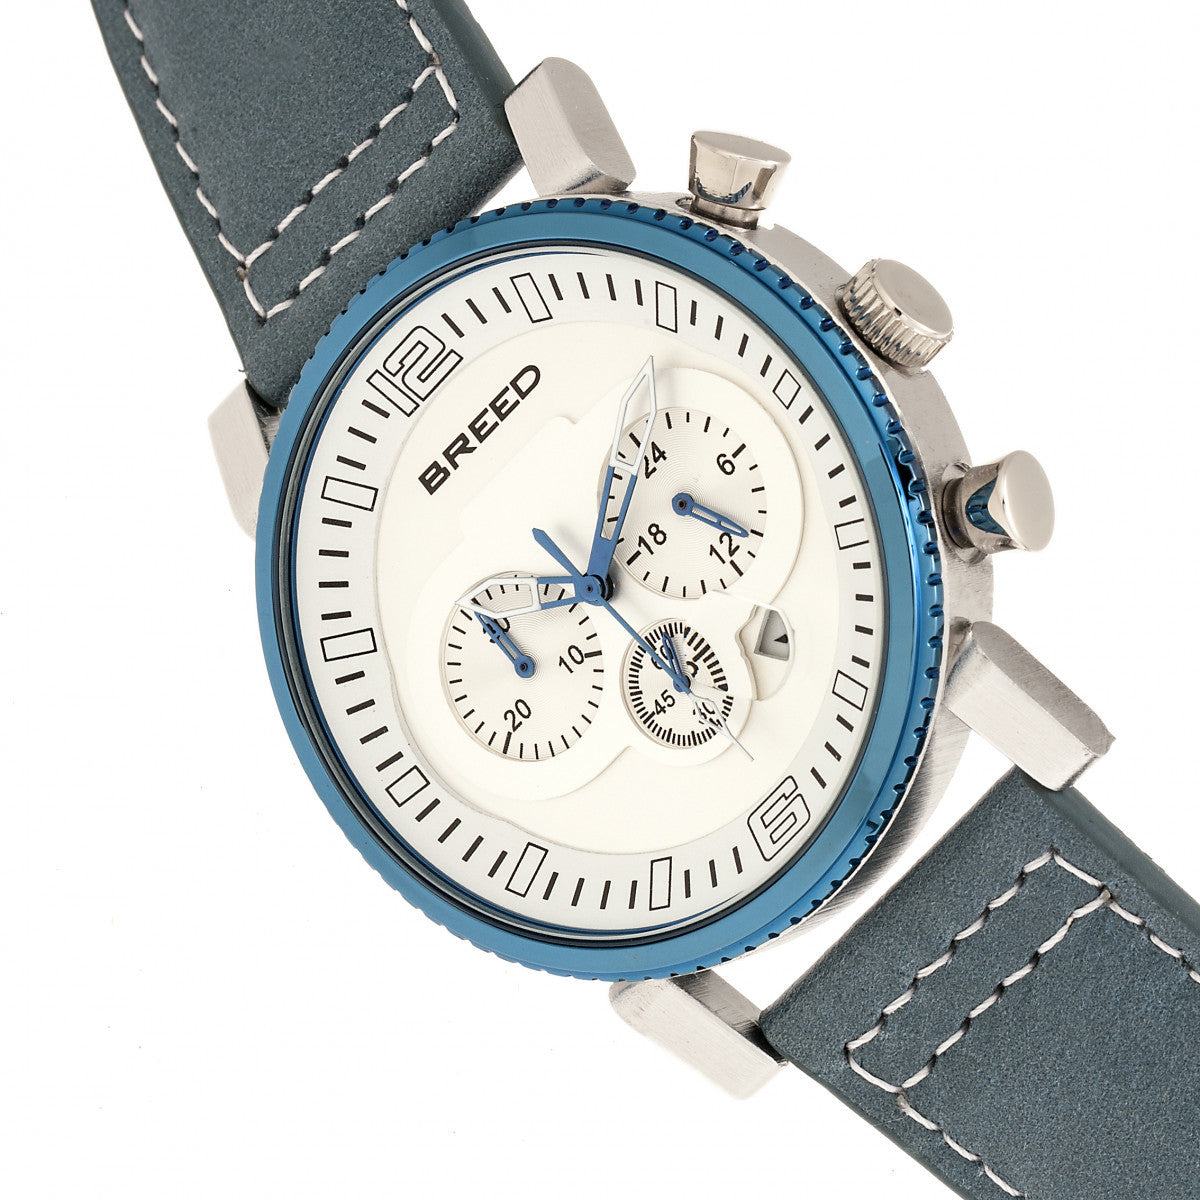 Breed Ryker Chronograph Leather-Band Watch w/Date - Teal/Silver - BRD8201